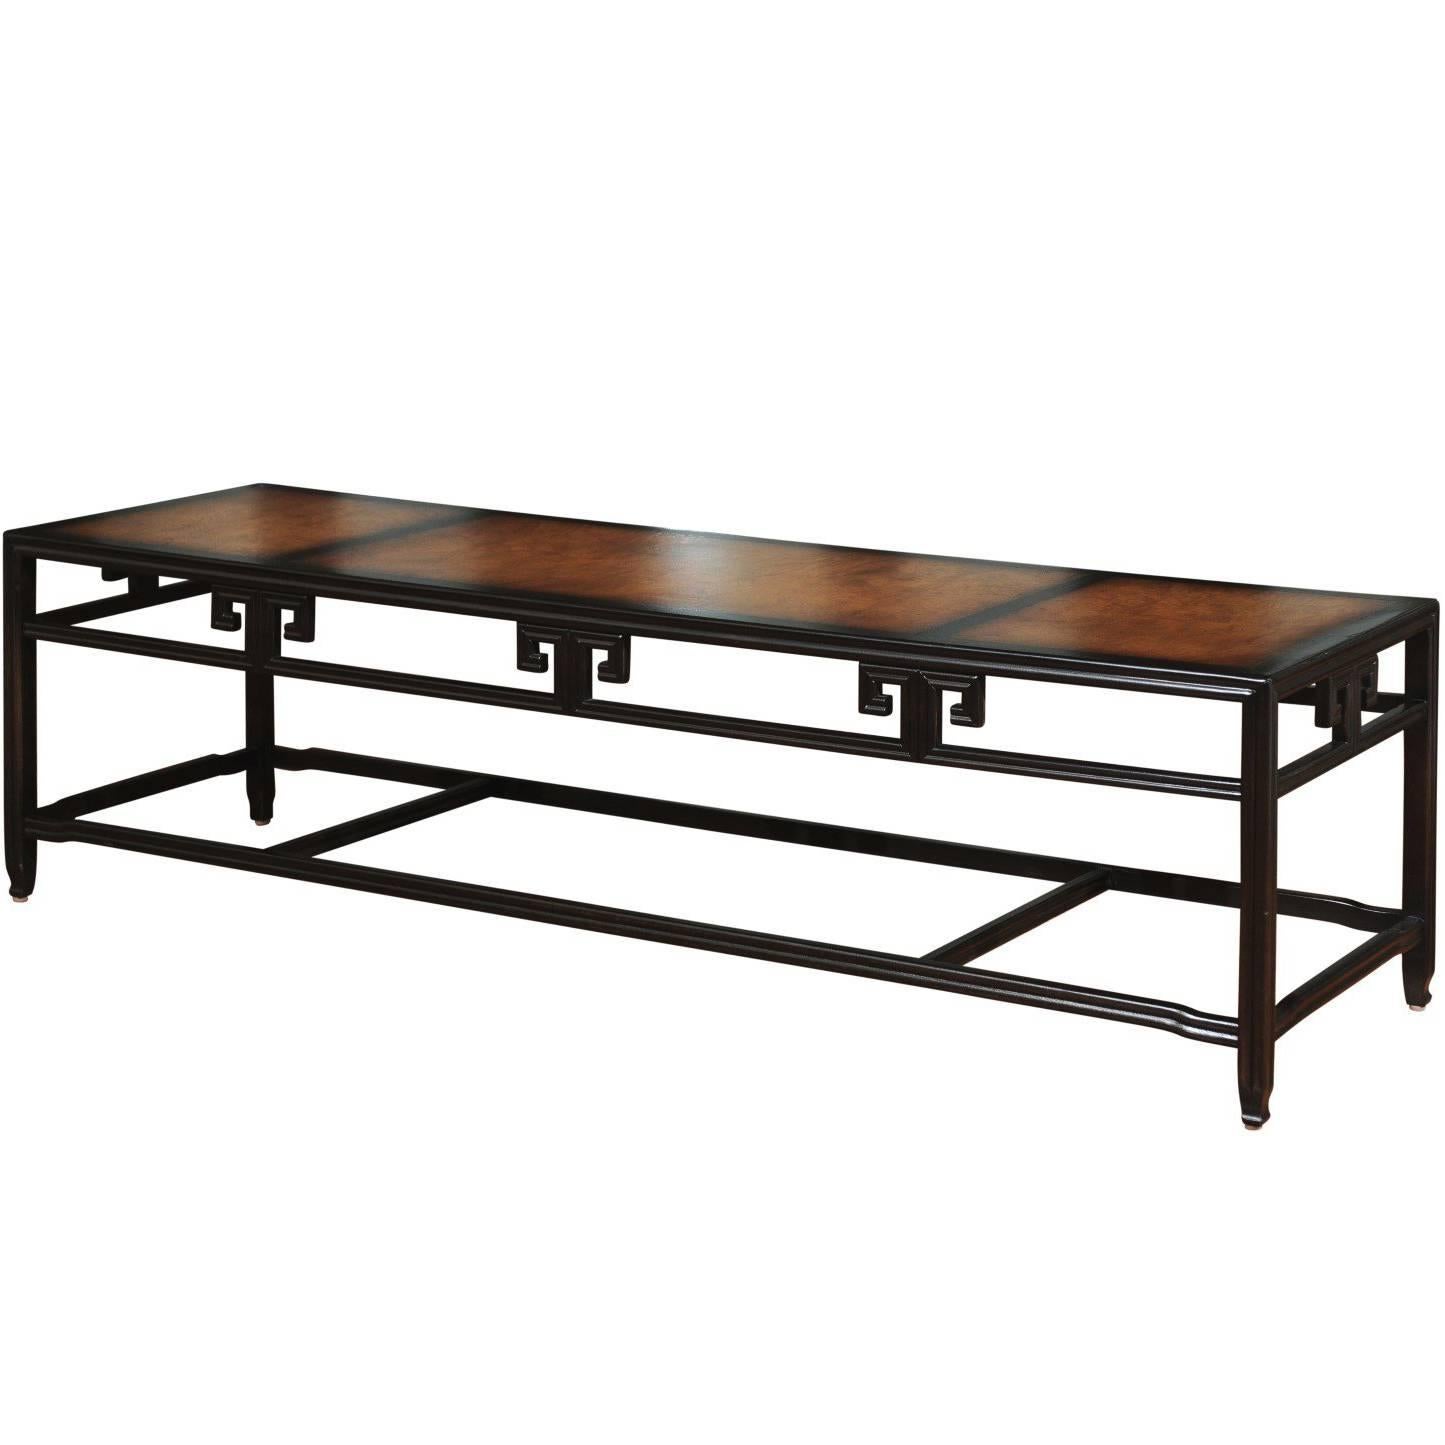 Elegant Burl Inlay Coffee Table, "Far East" Collection by Baker